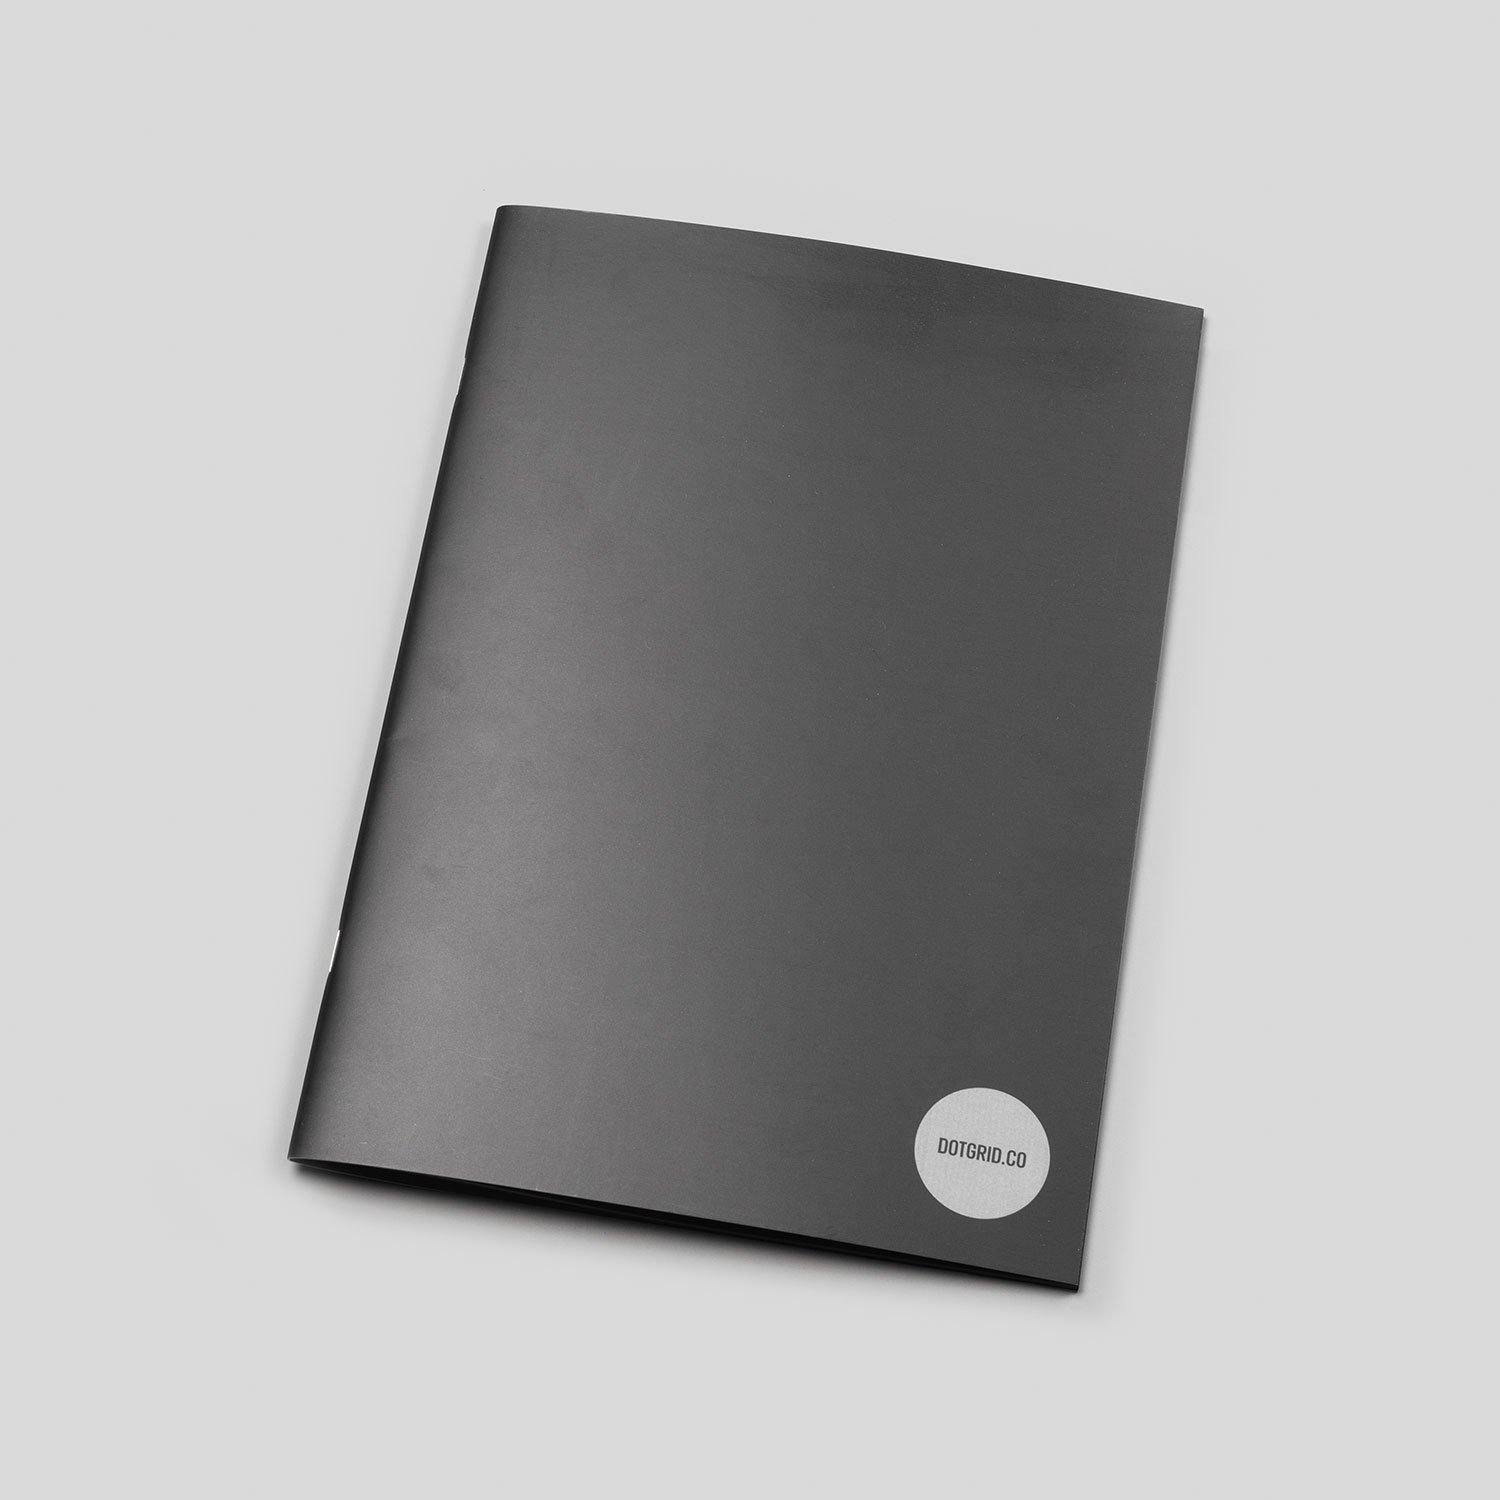 A4 Dot Grid Notepad - Black Pages - Dotgrid